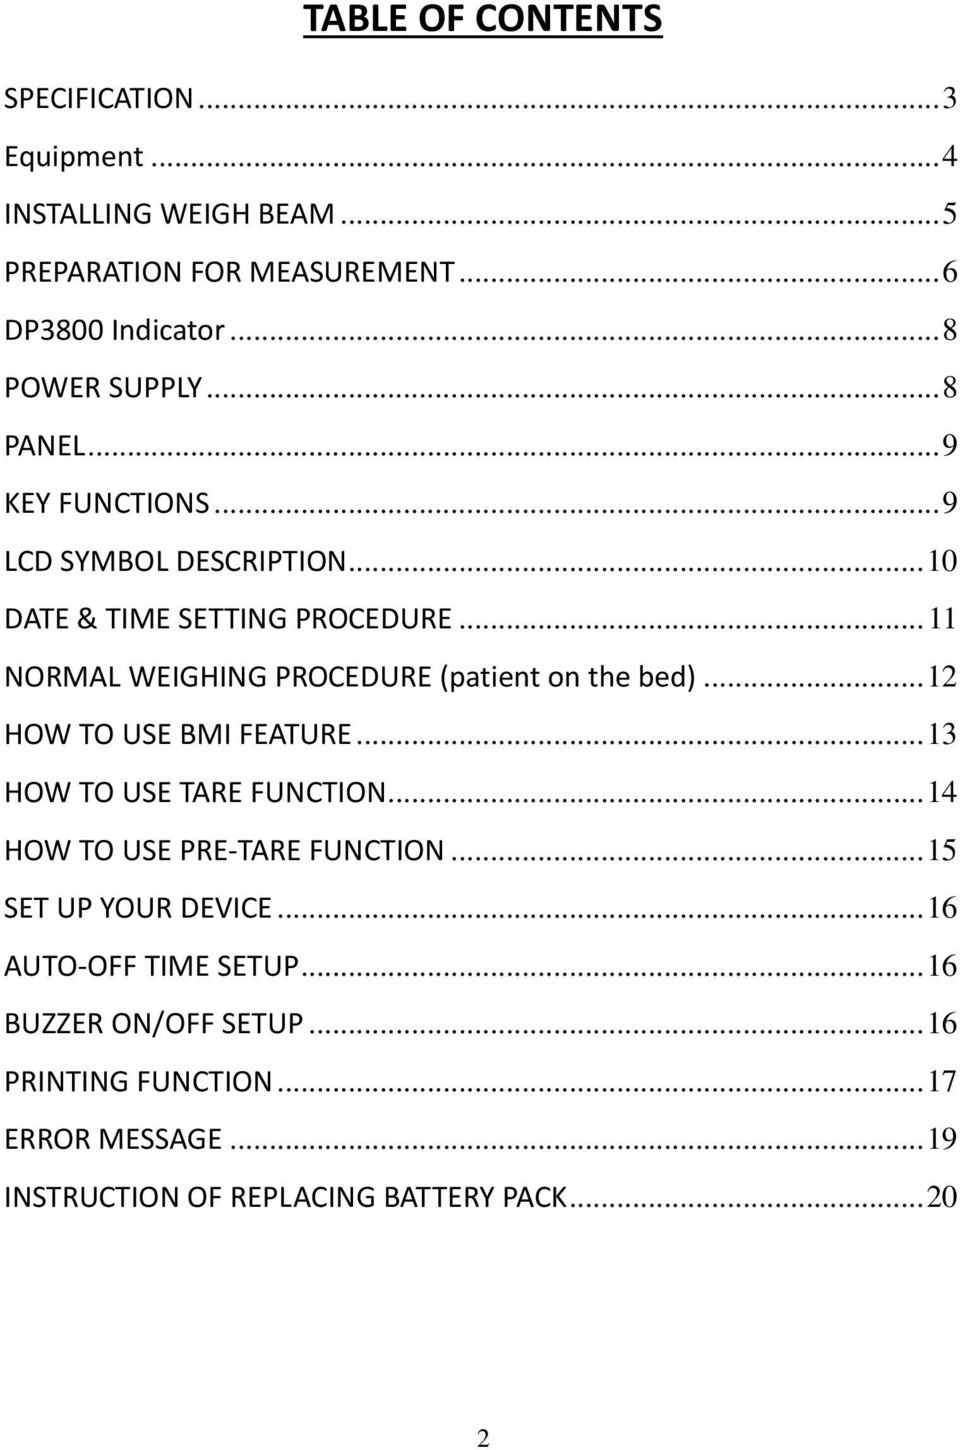 .. 11 NORMAL WEIGHING PROCEDURE (patient on the bed)... 12 HOW TO USE BMI FEATURE... 13 HOW TO USE TARE FUNCTION.